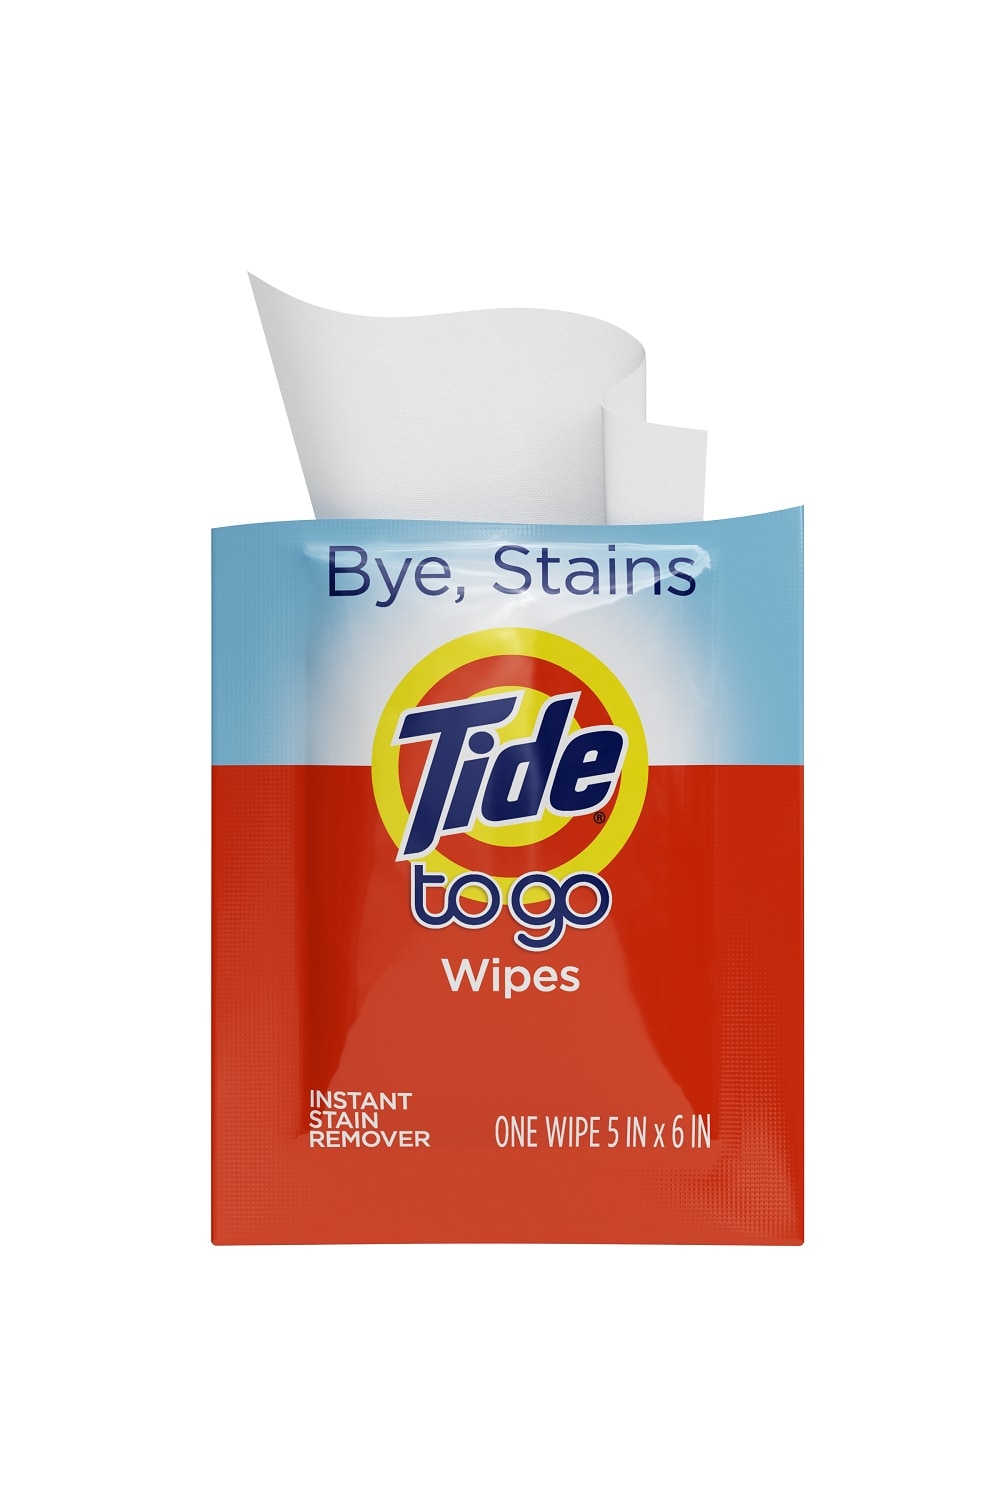 Shout Wipe & Go Instant Stain Remover Wipes, 12 CT (12 Packs of